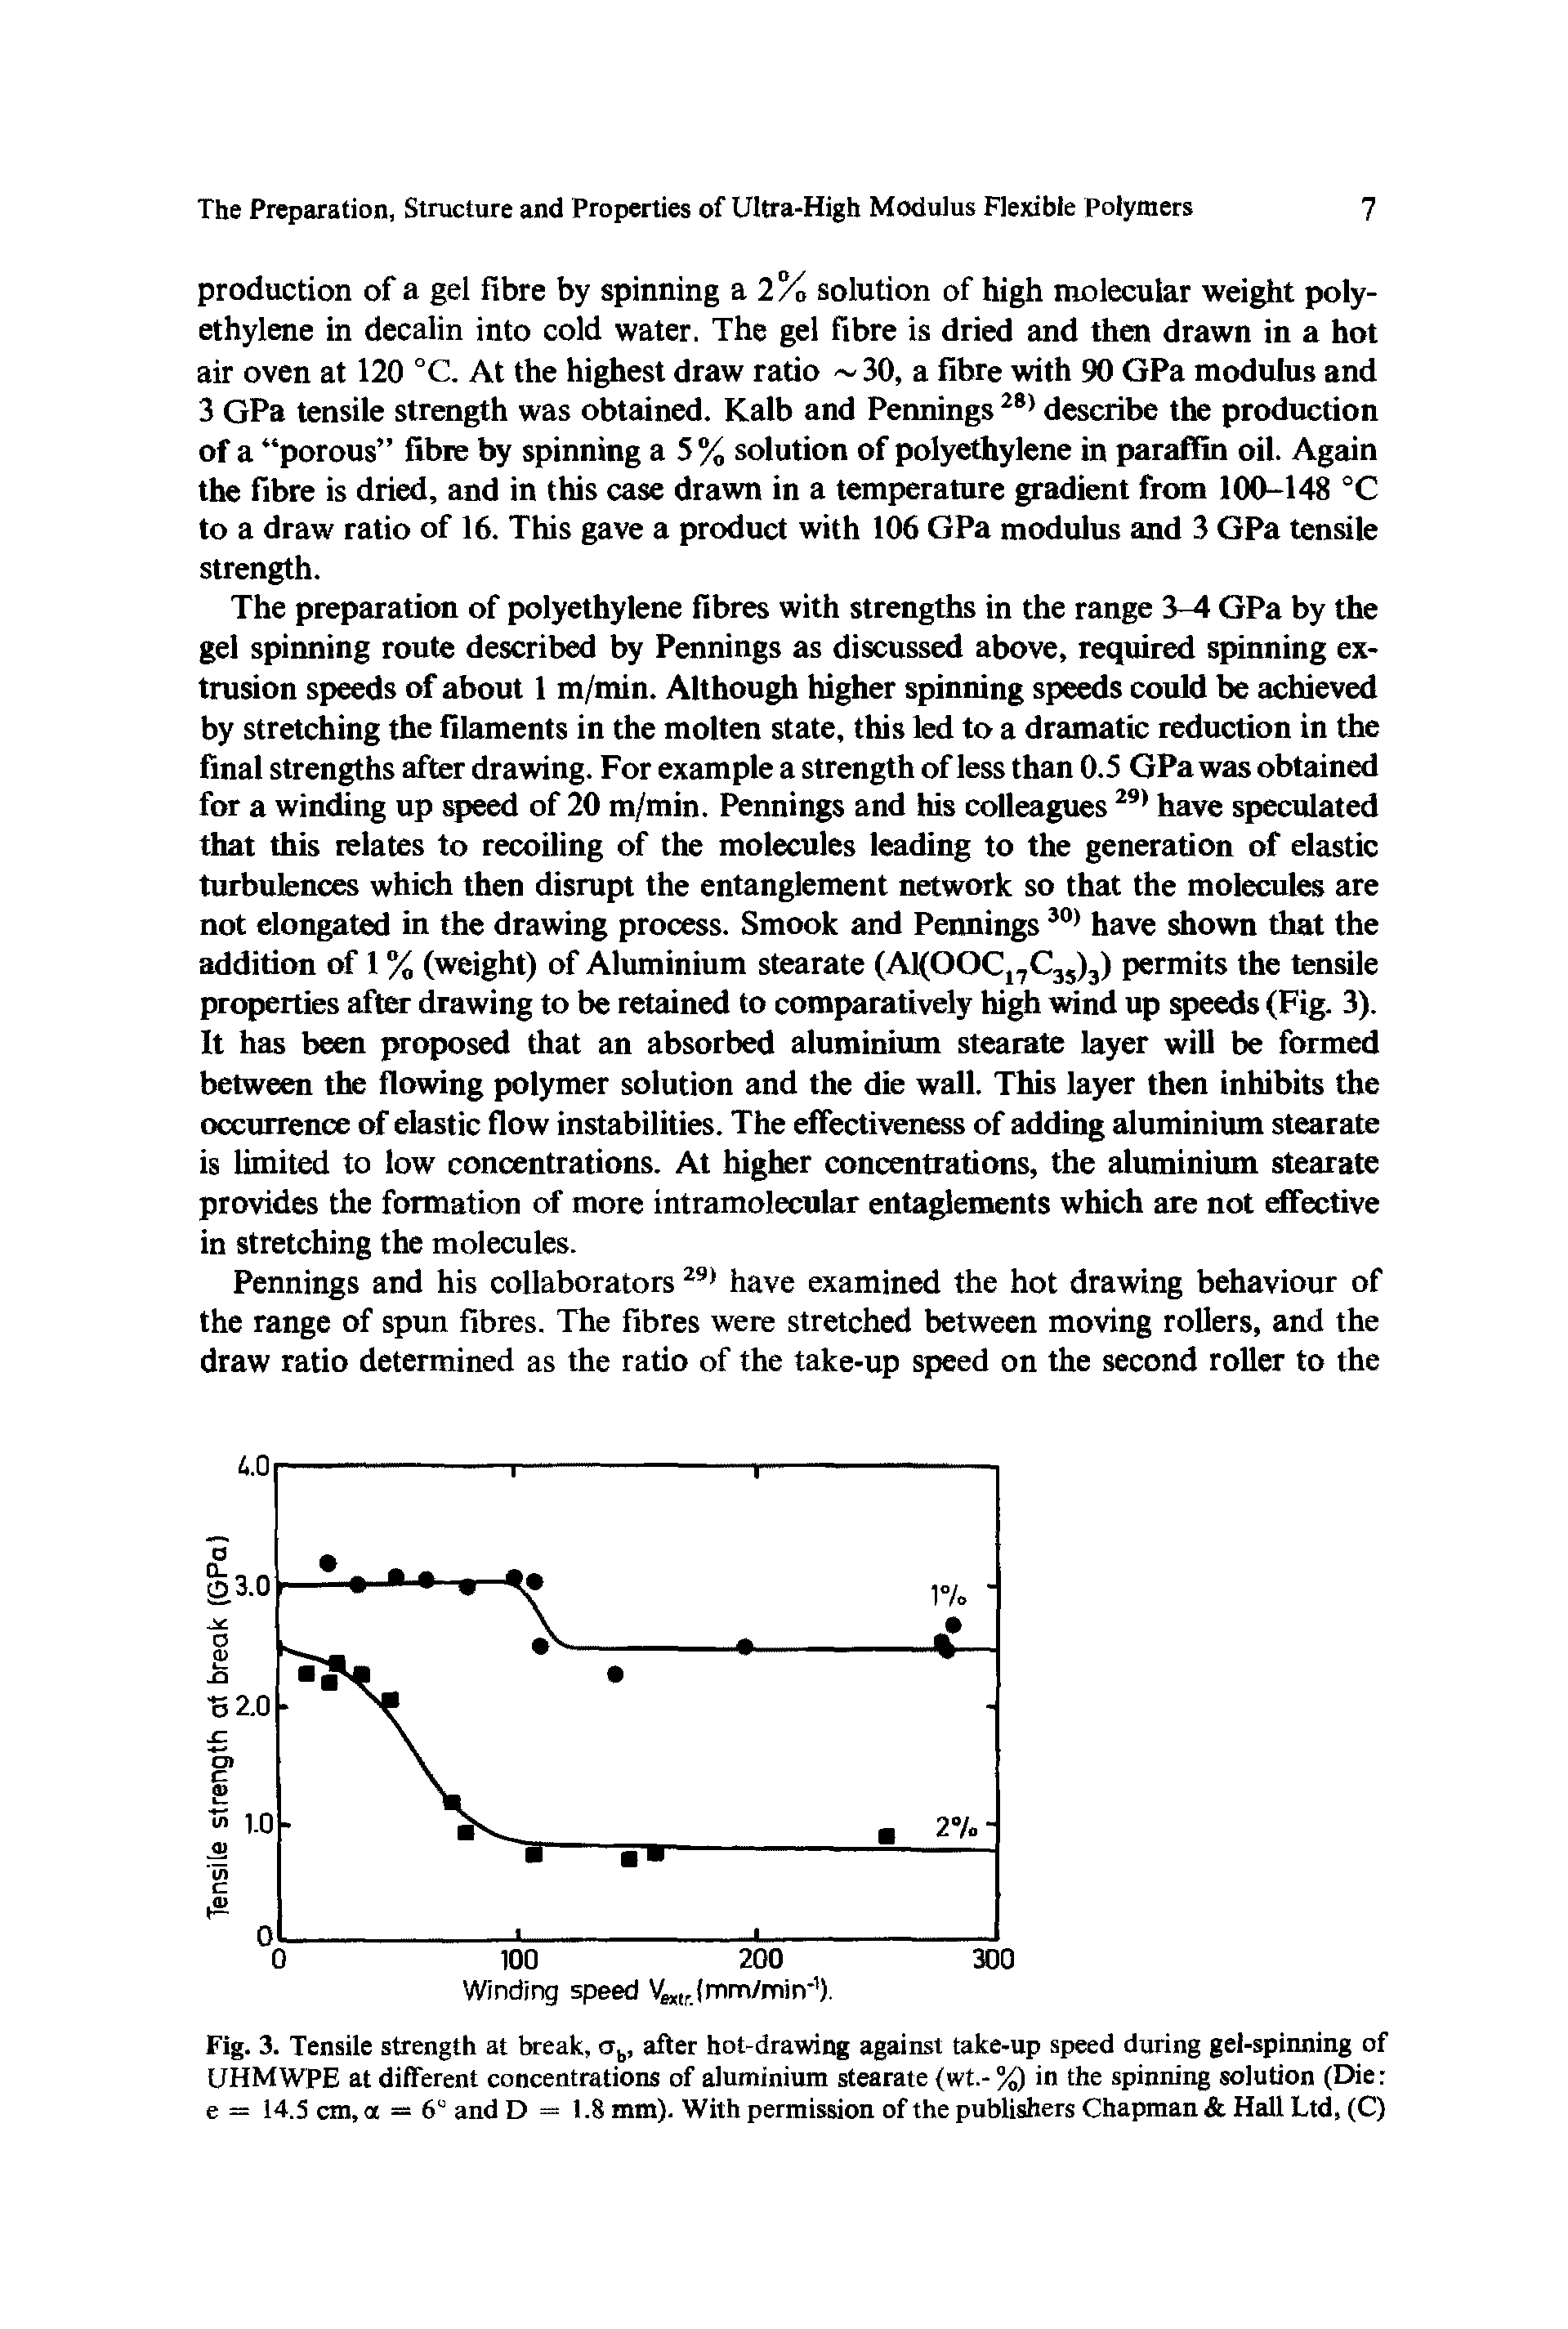 Fig. 3. Tensile strength at break, a, after hot-drawing against take-up speed during gel-spinning of UHMWPE at different concentrations of aluminium stearate (wt.- %) in the spinning solution (Die e = 14.5 cm, a = 6" and D = 1.8 mm). With permission of the publishers Chapman Hall Ltd, (C)...